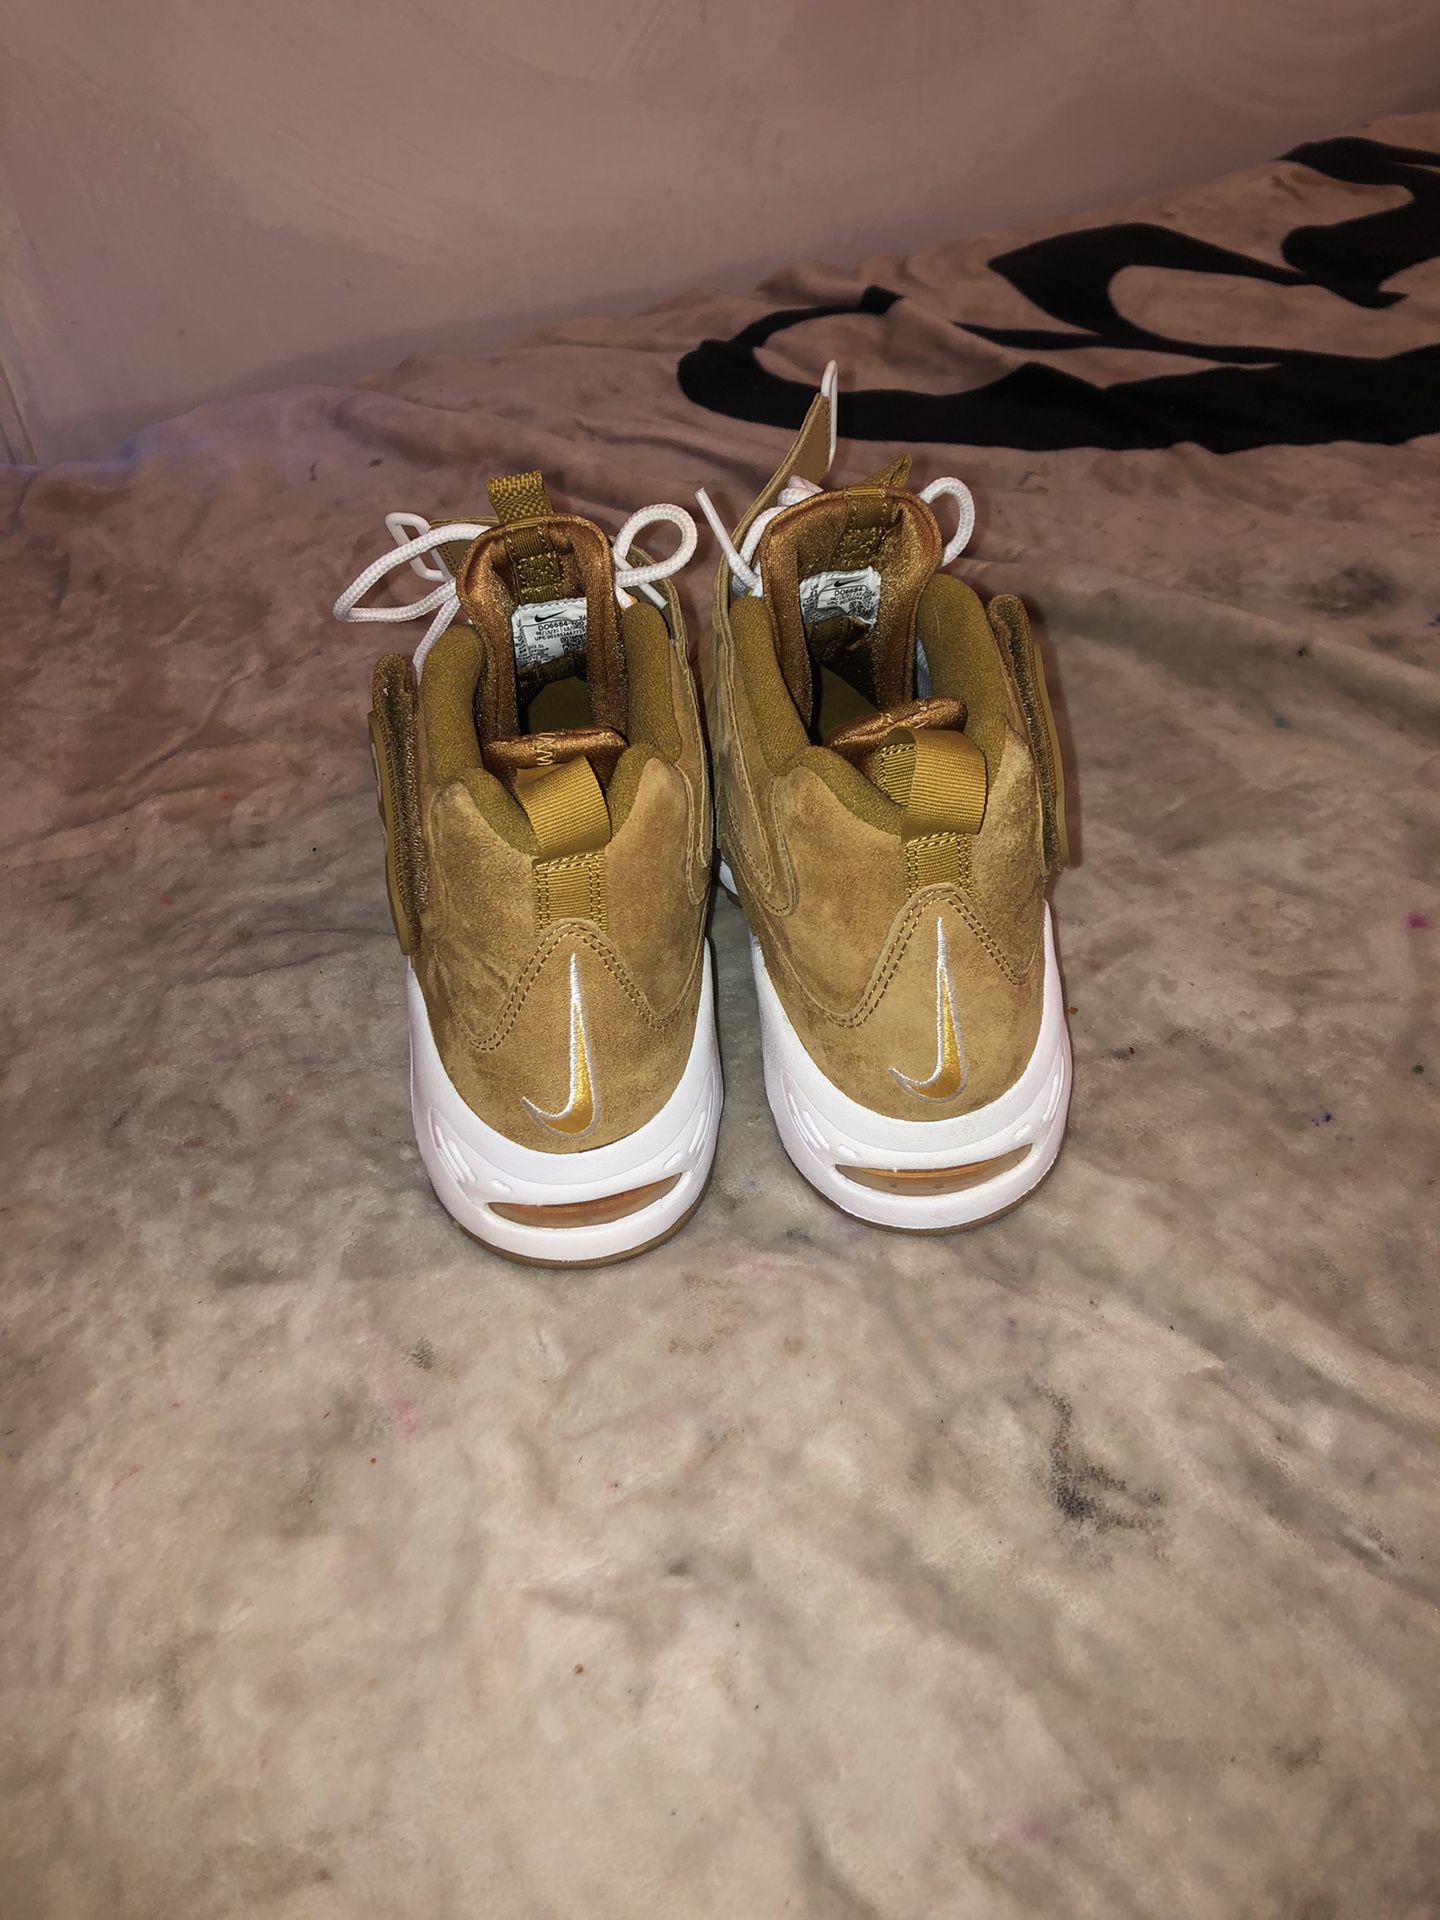 Air Griffey’s Max Wheat 1s Size 10